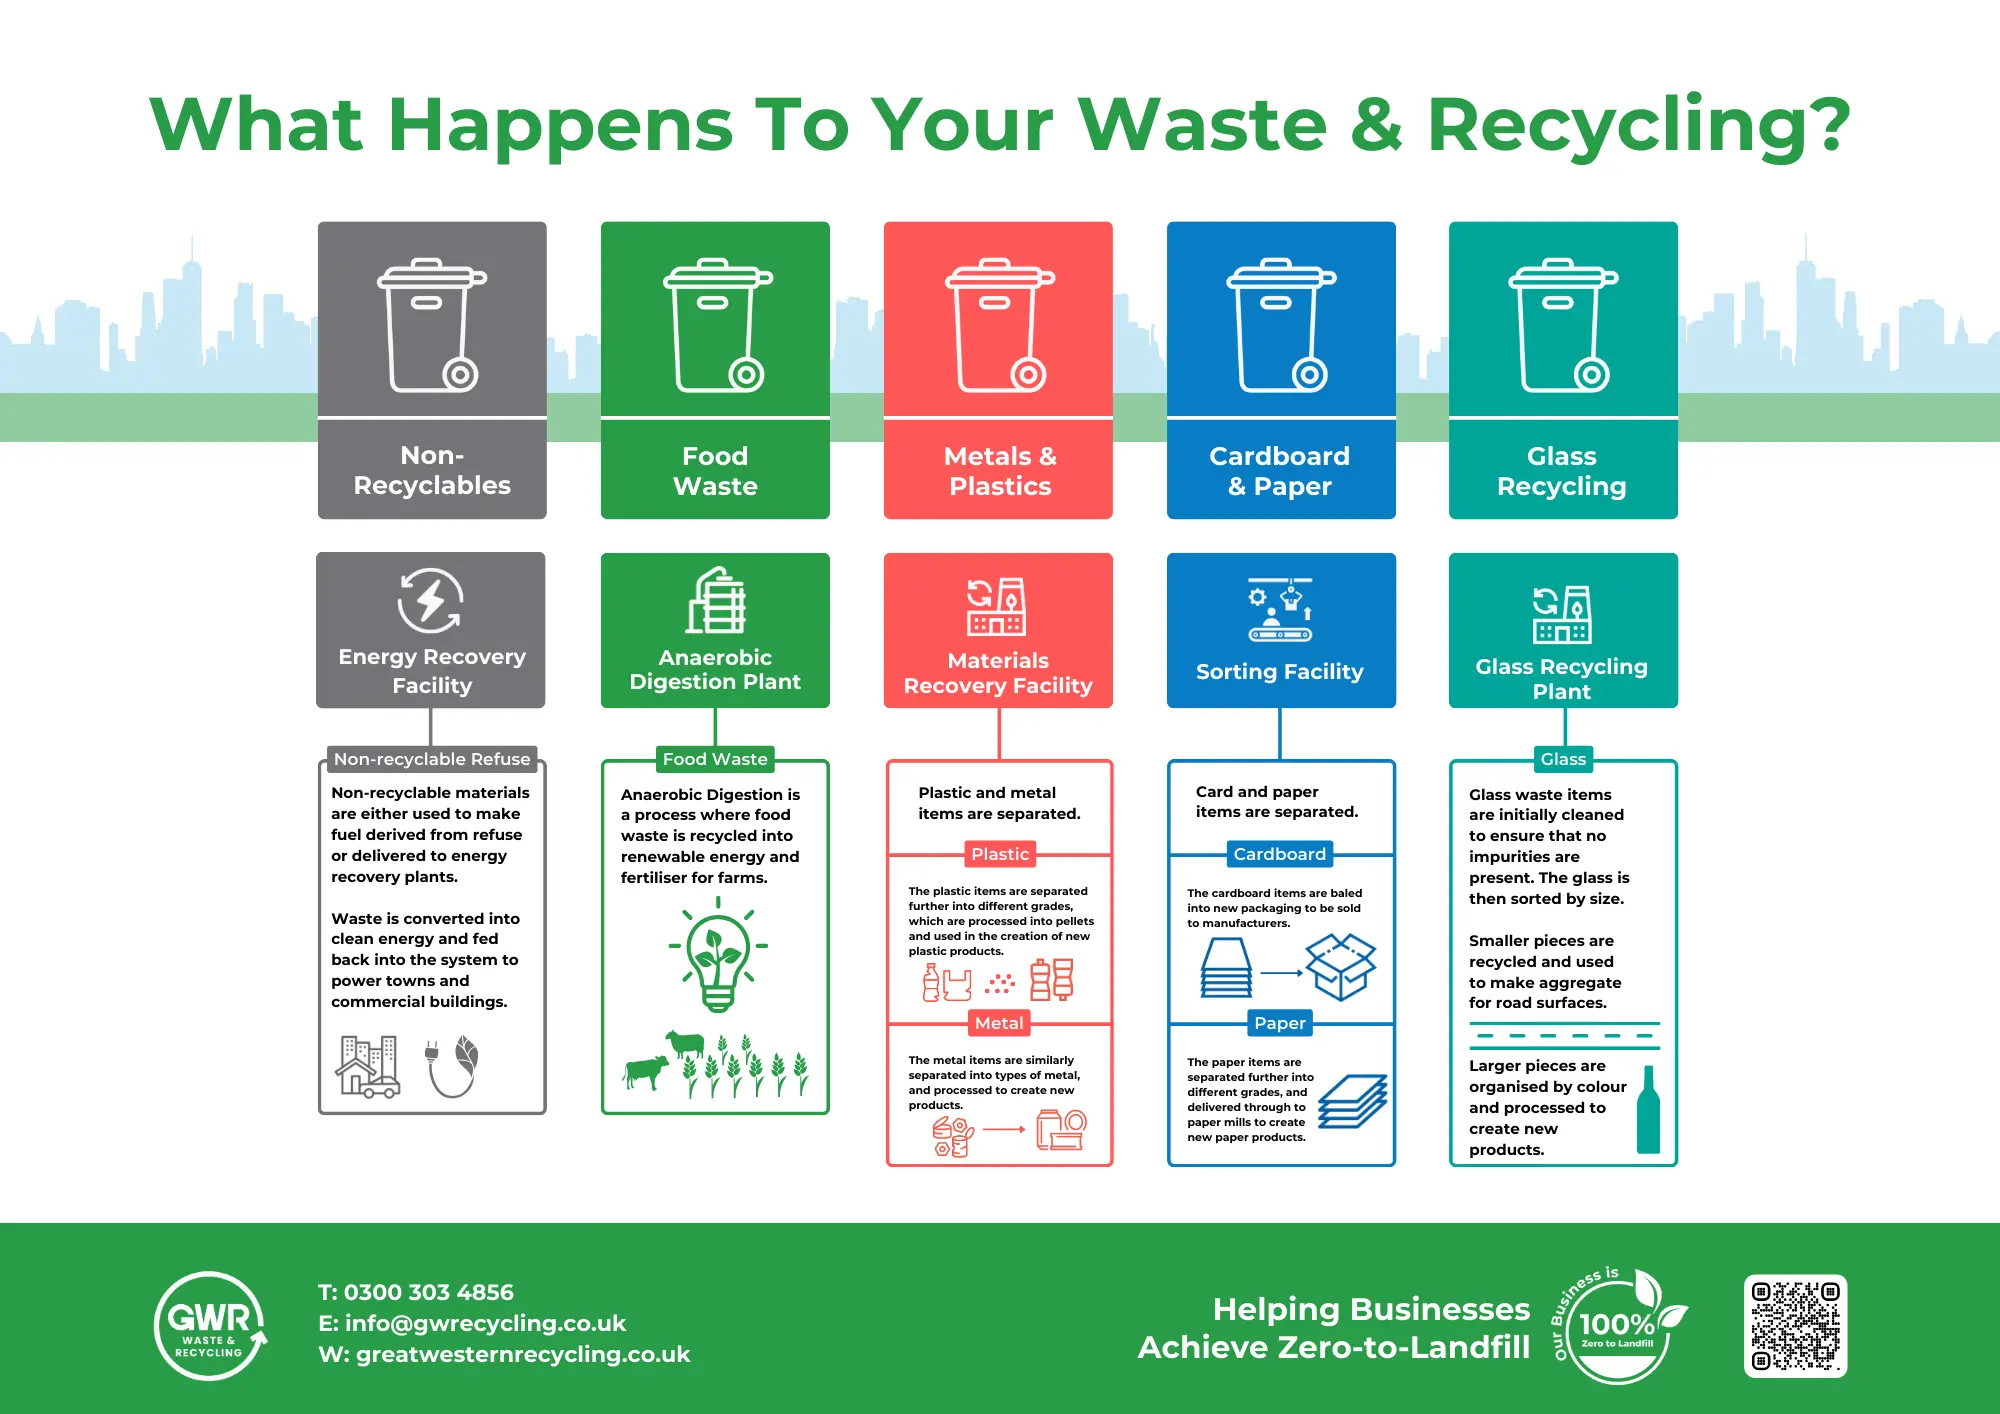 What happens to your Waste & Recycling